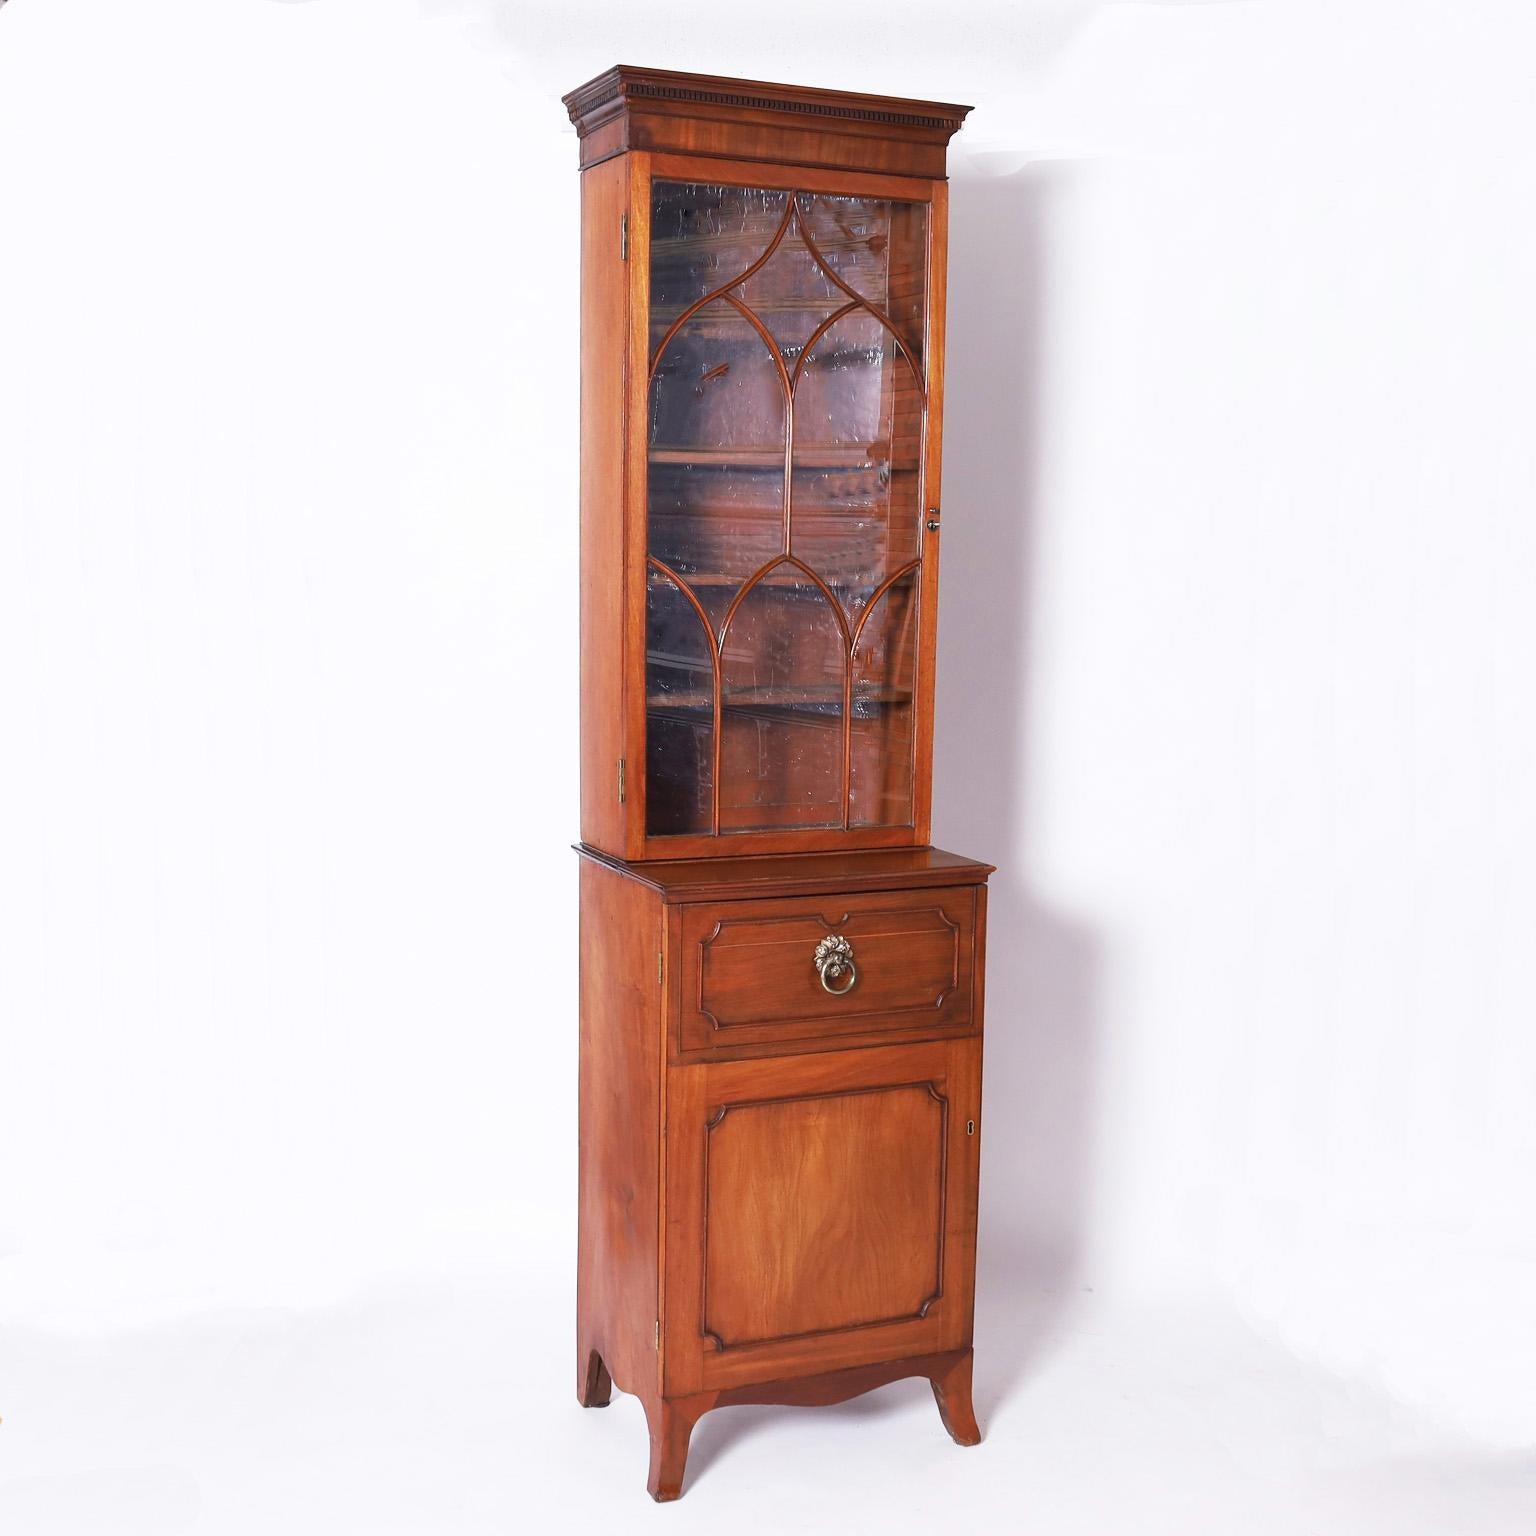 Rare and remarkable pair of British colonial cabinets hand crafted in mahogany and featuring bonnets with carved cornices, glazed step-back bookcases with graceful window pane designs above storage cabinets on Georgian style splayed feet.